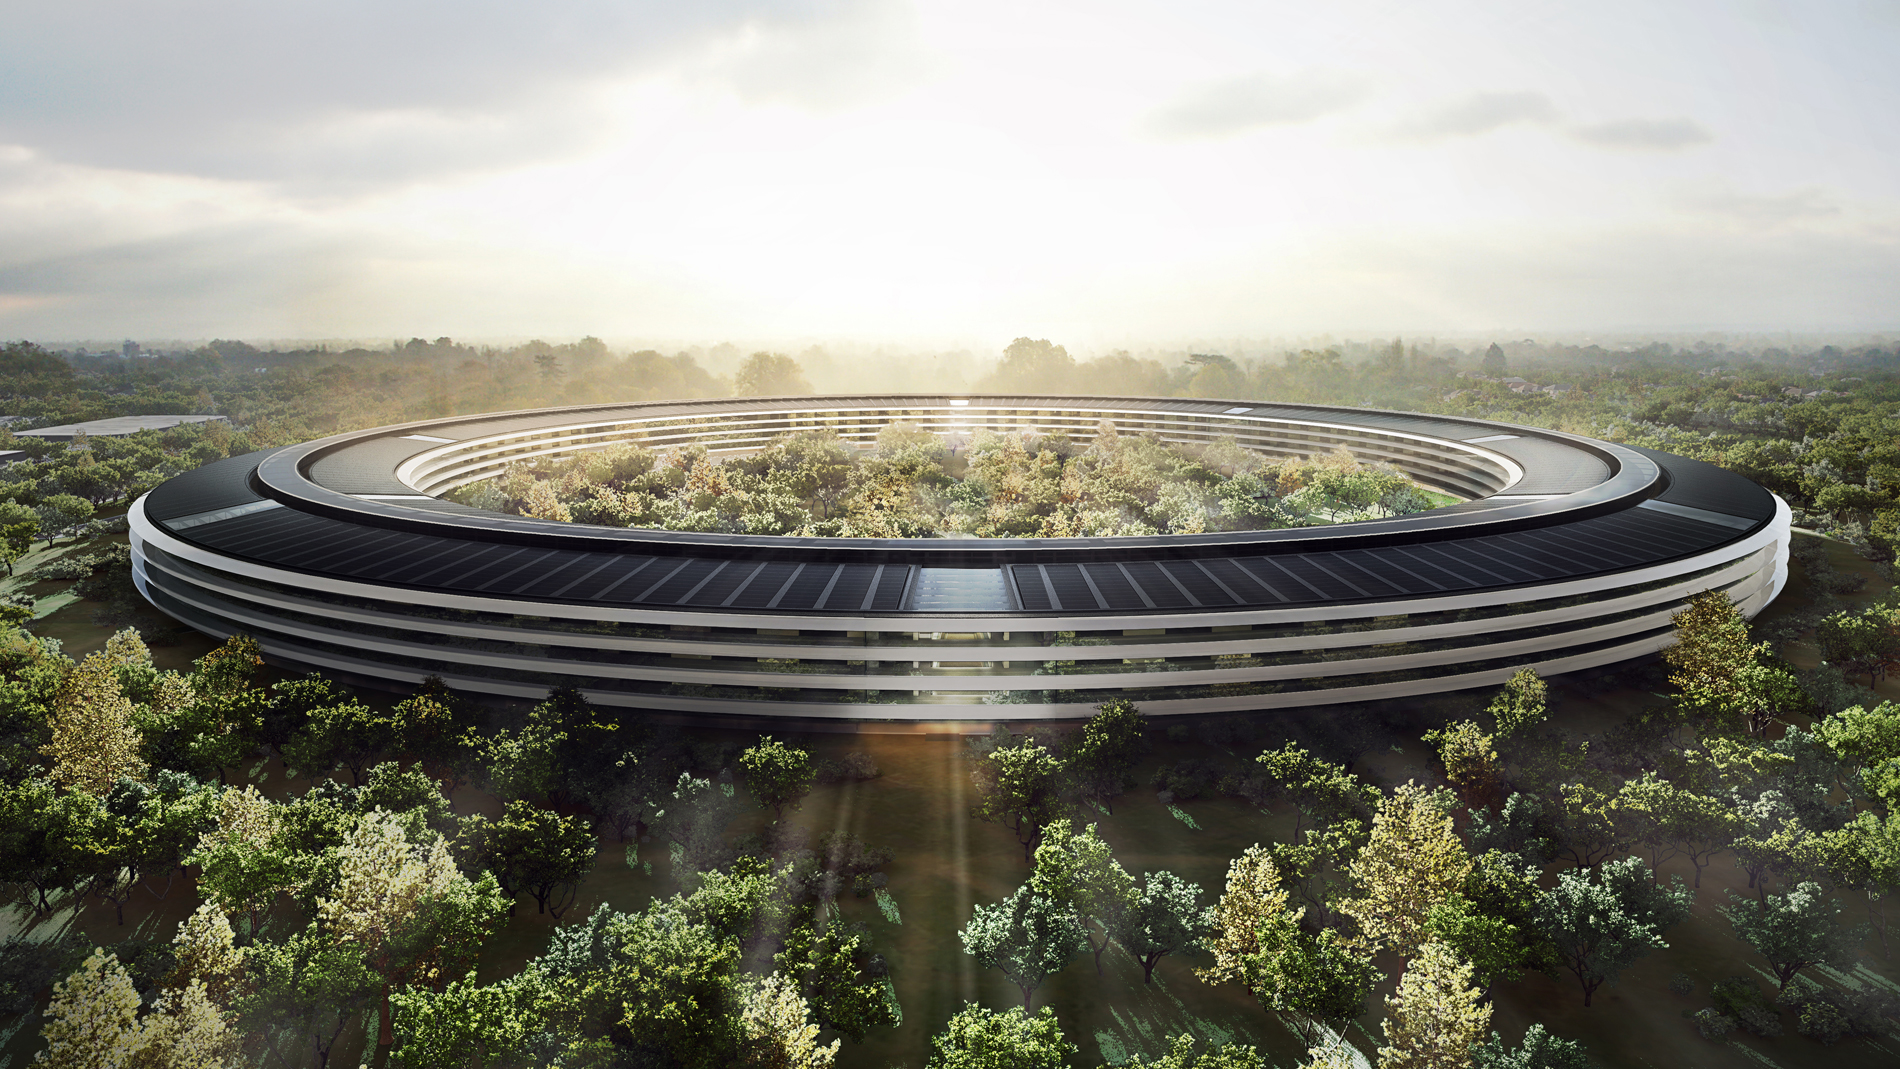 Take a Video Drone flyover of the Amazing new Apple Campus